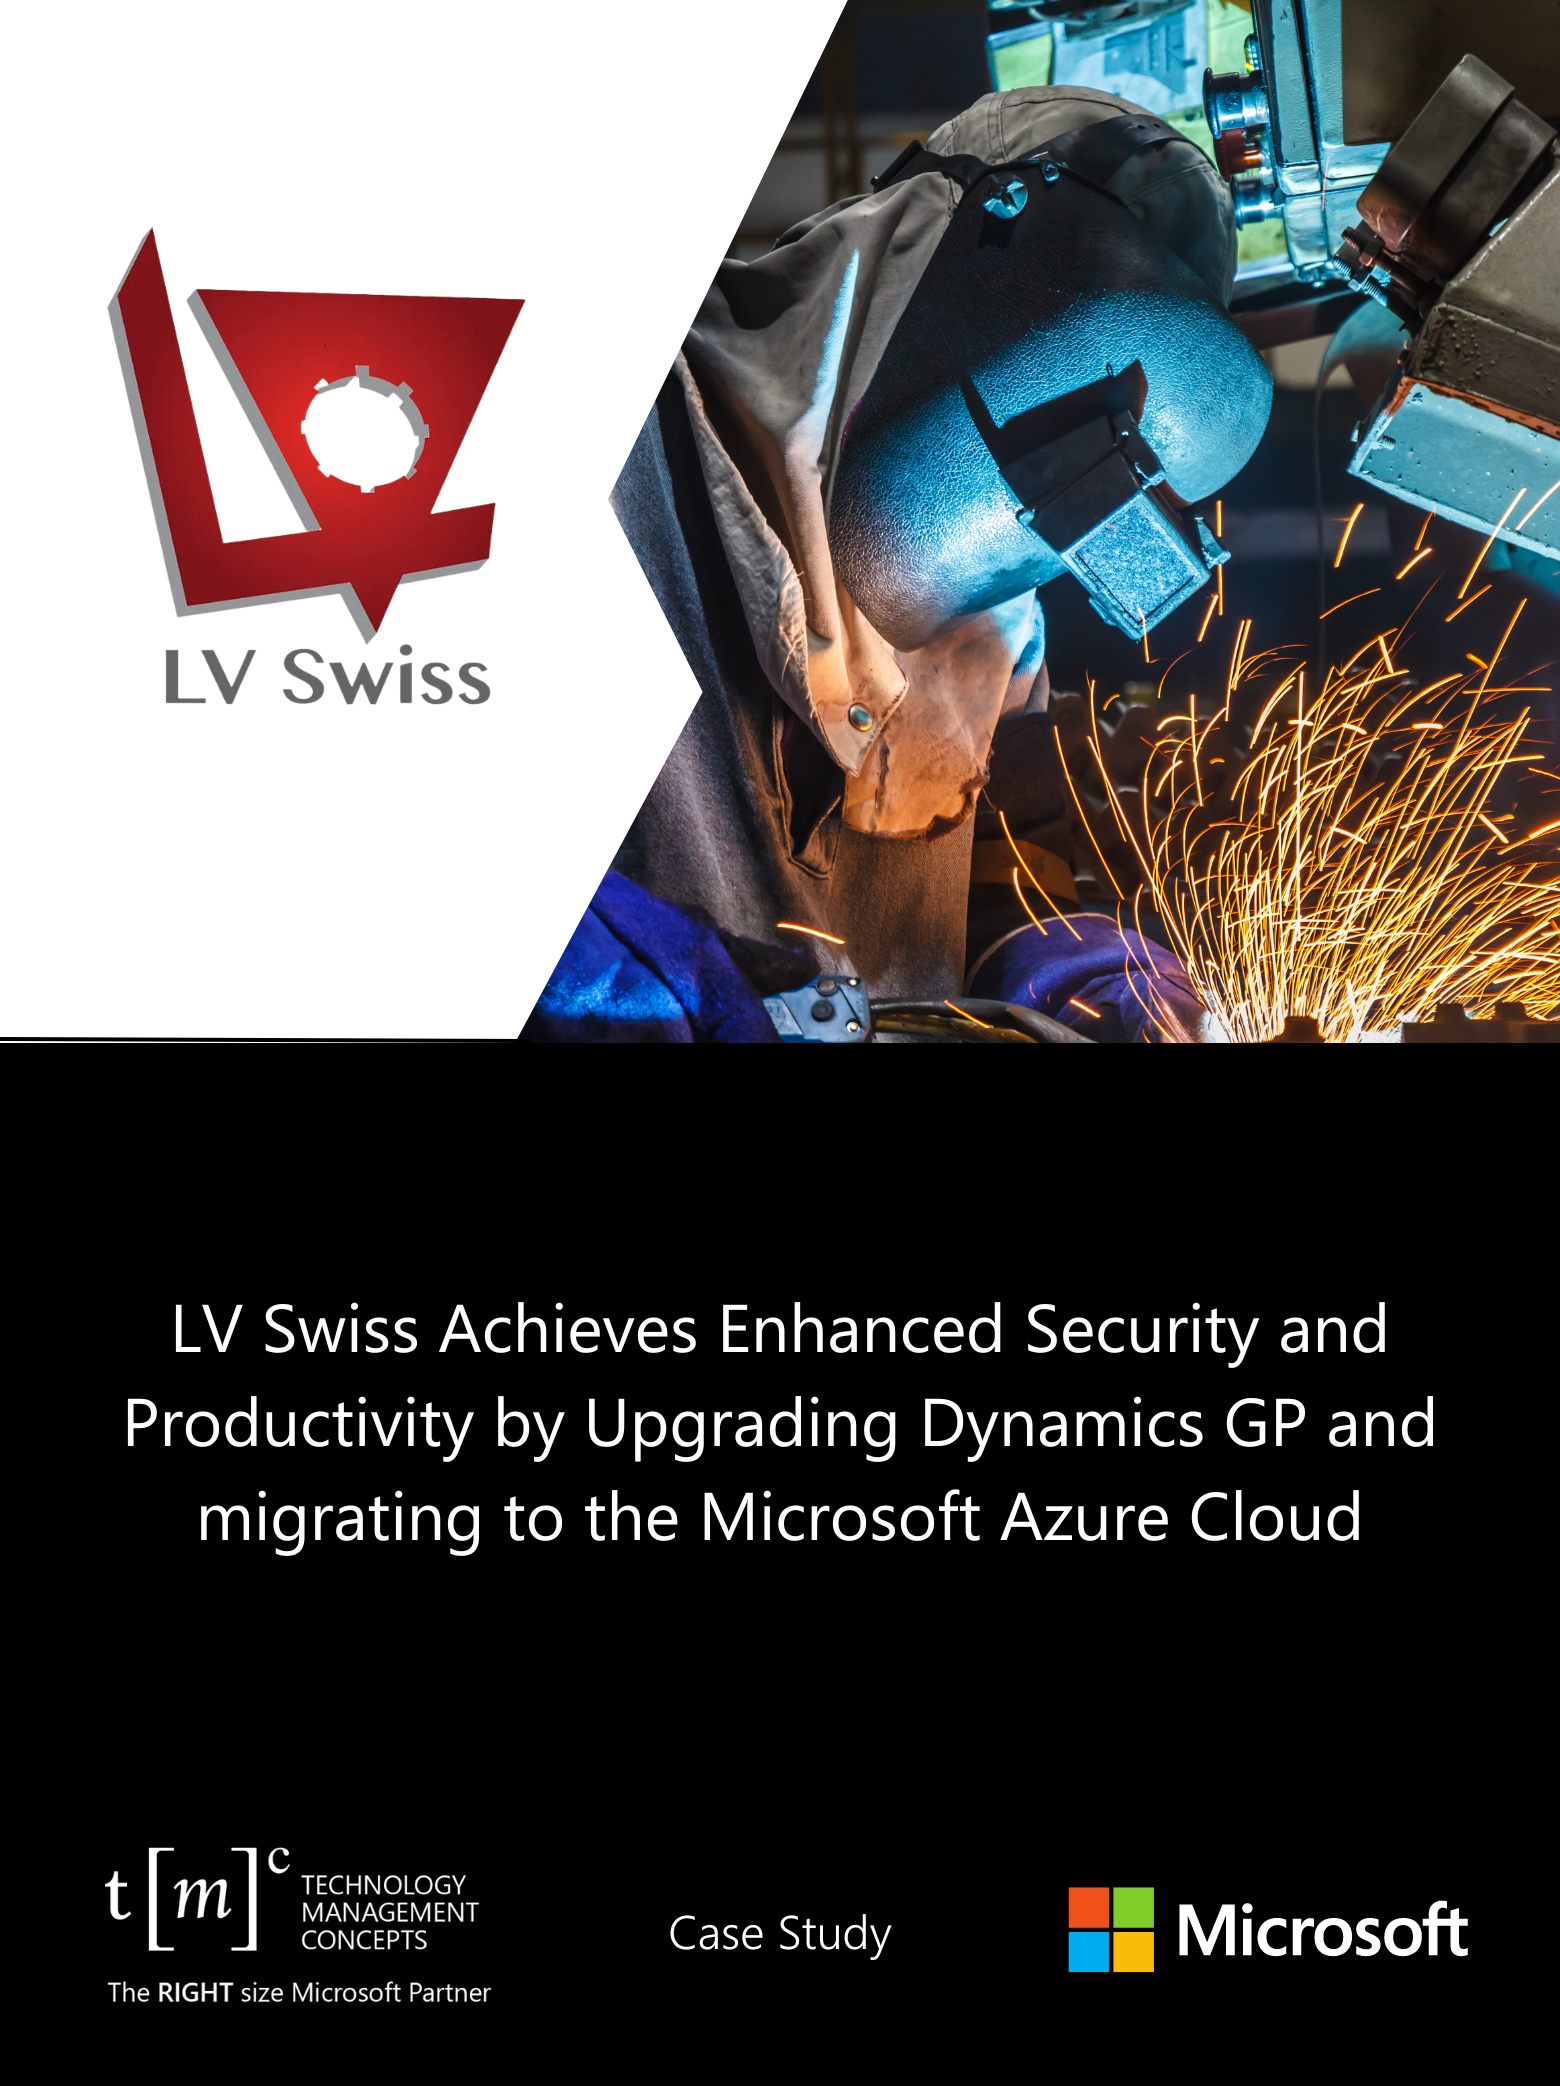 Learn How How LV Swiss Achieves Enhanced Security and Productivity by Upgrading Dynamics GP and Migrating to the Microsoft Azure Cloud